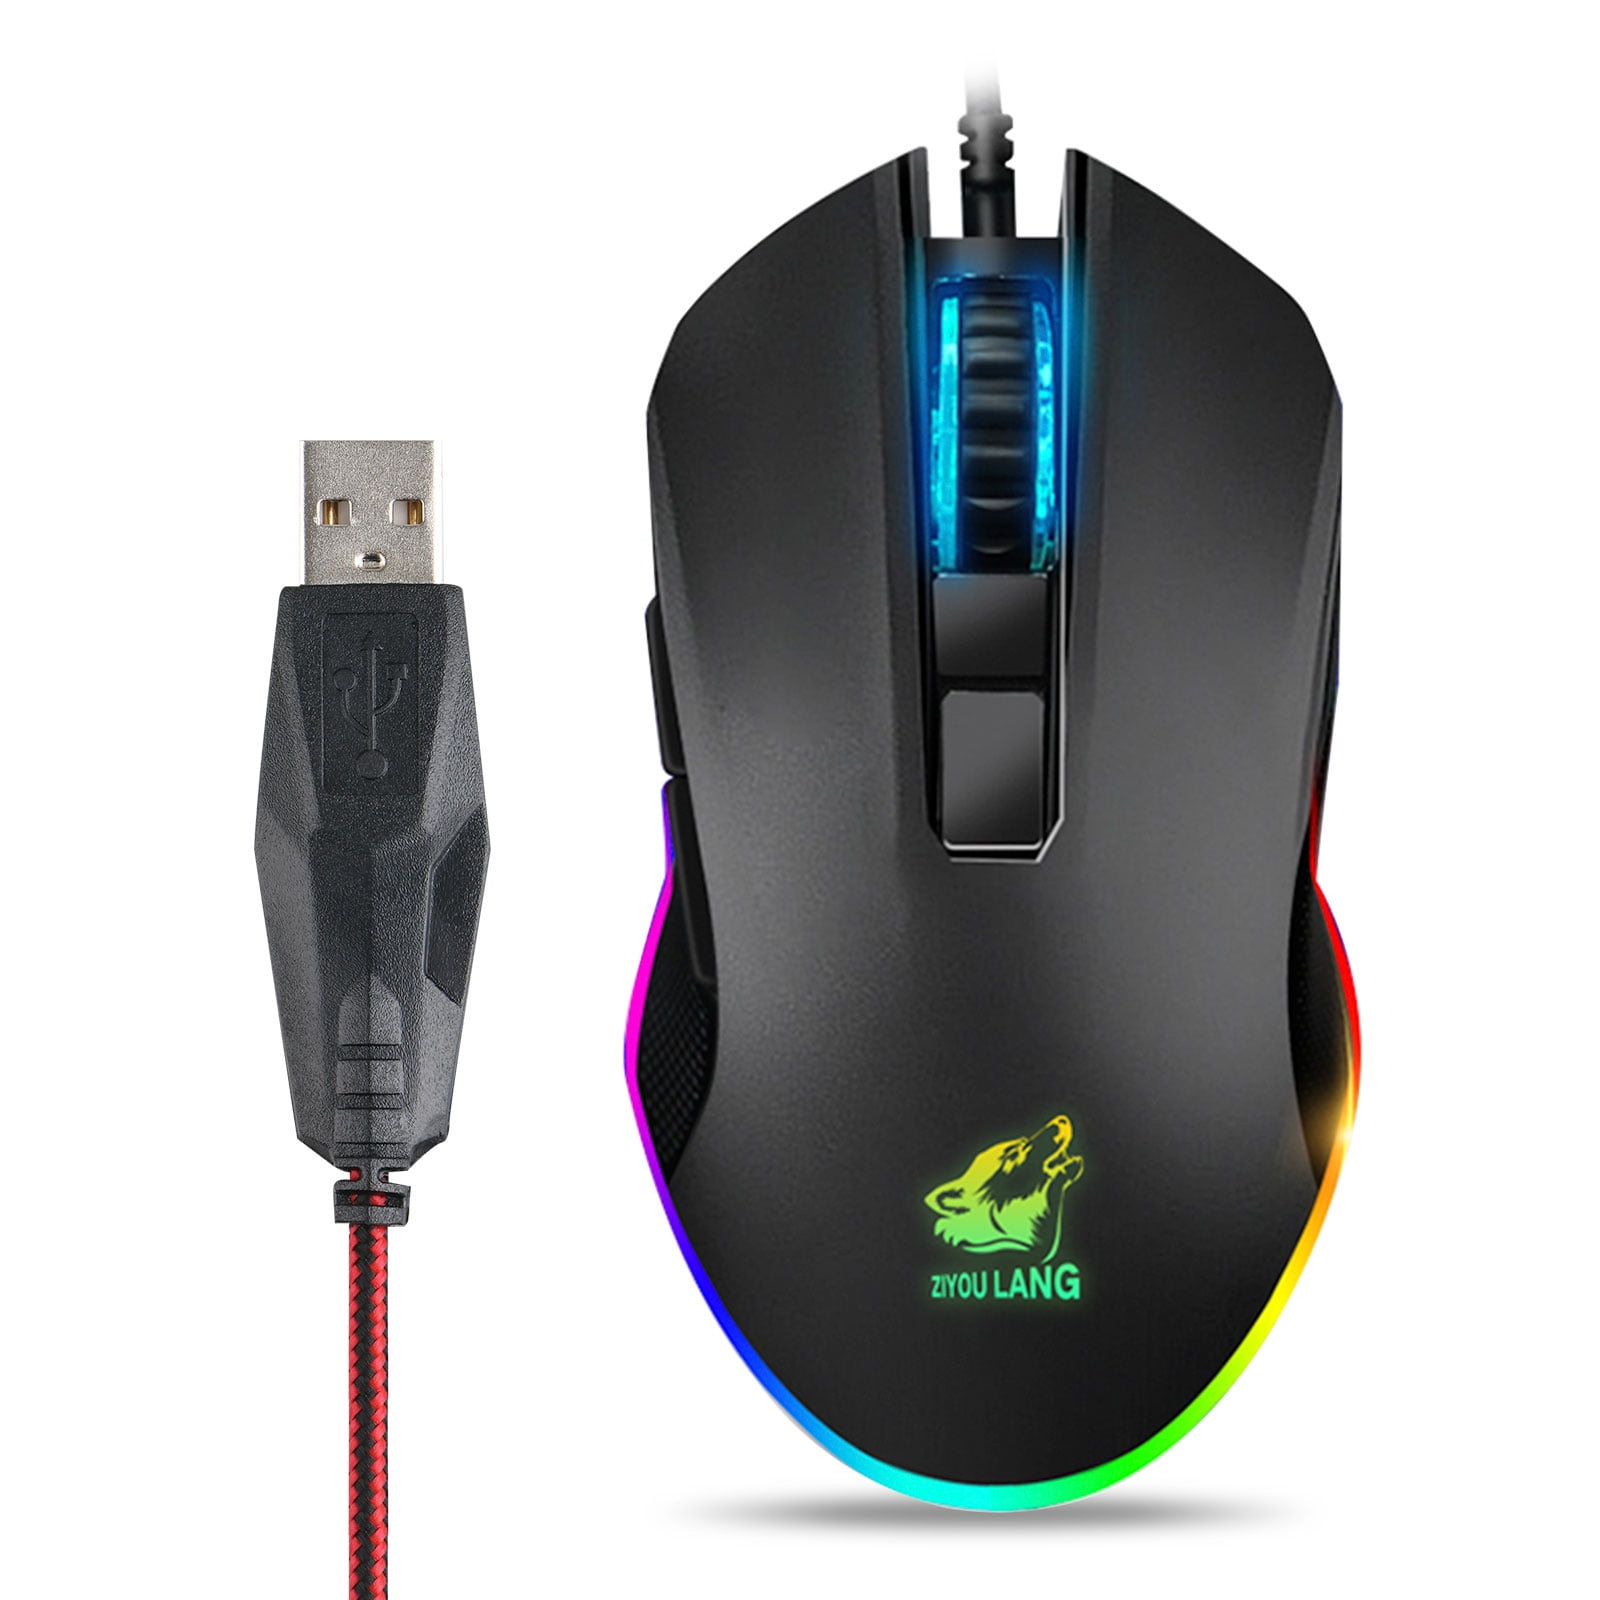 Еми Медиа - 599 den / 9.8 euro VERBATIM GAMING x7 V2 MOUSE •Resolution: 800  - 3200 selectable dpi,•Acceleration: 20G•Tracking Speed: 40ips (inches per  second)•Frame rate: 9600fps (frames per second)•Buttons: 8 buttons 